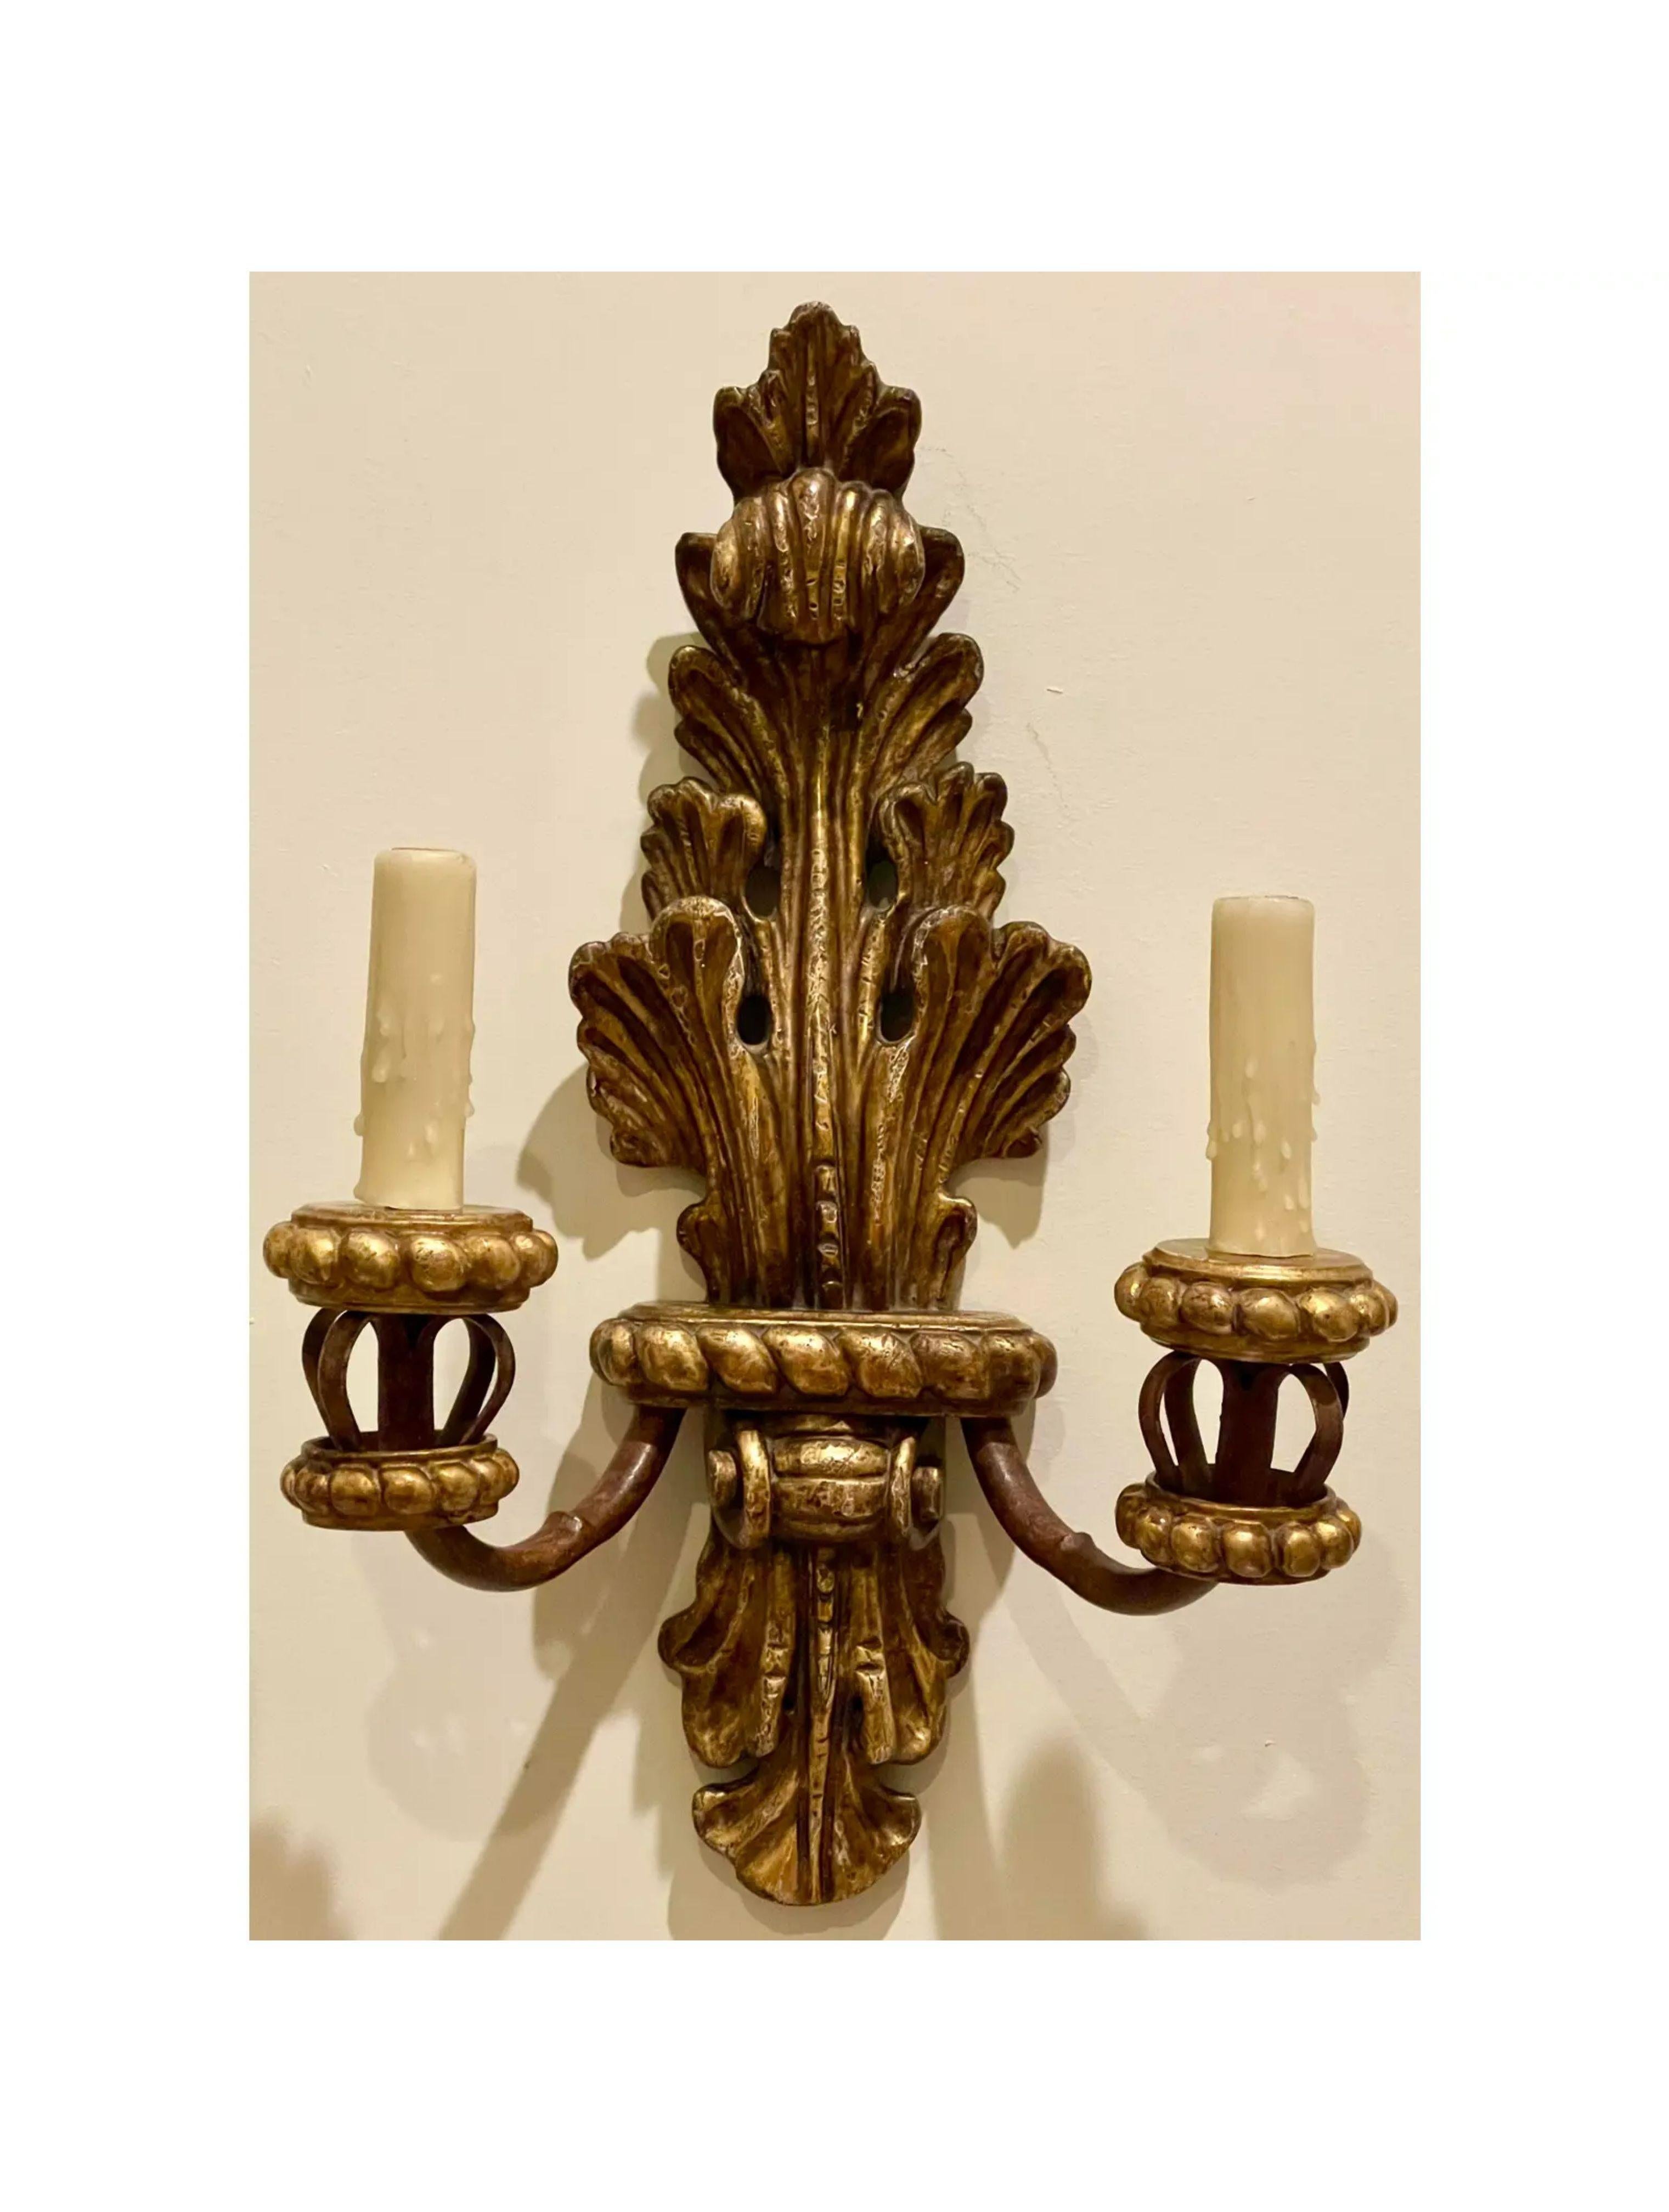 18th C Style Michael Taylor Giltwood Acanthus Leaf 2 Lite Sconce - a Pair

Additional information: 
Materials: Giltwood, Iron, Lights
Color: Gold
Brand: Michael Taylor
Designer: Niermann Weeks
Period: 2010s
Styles: Italian, Spanish Colonial
Lamp